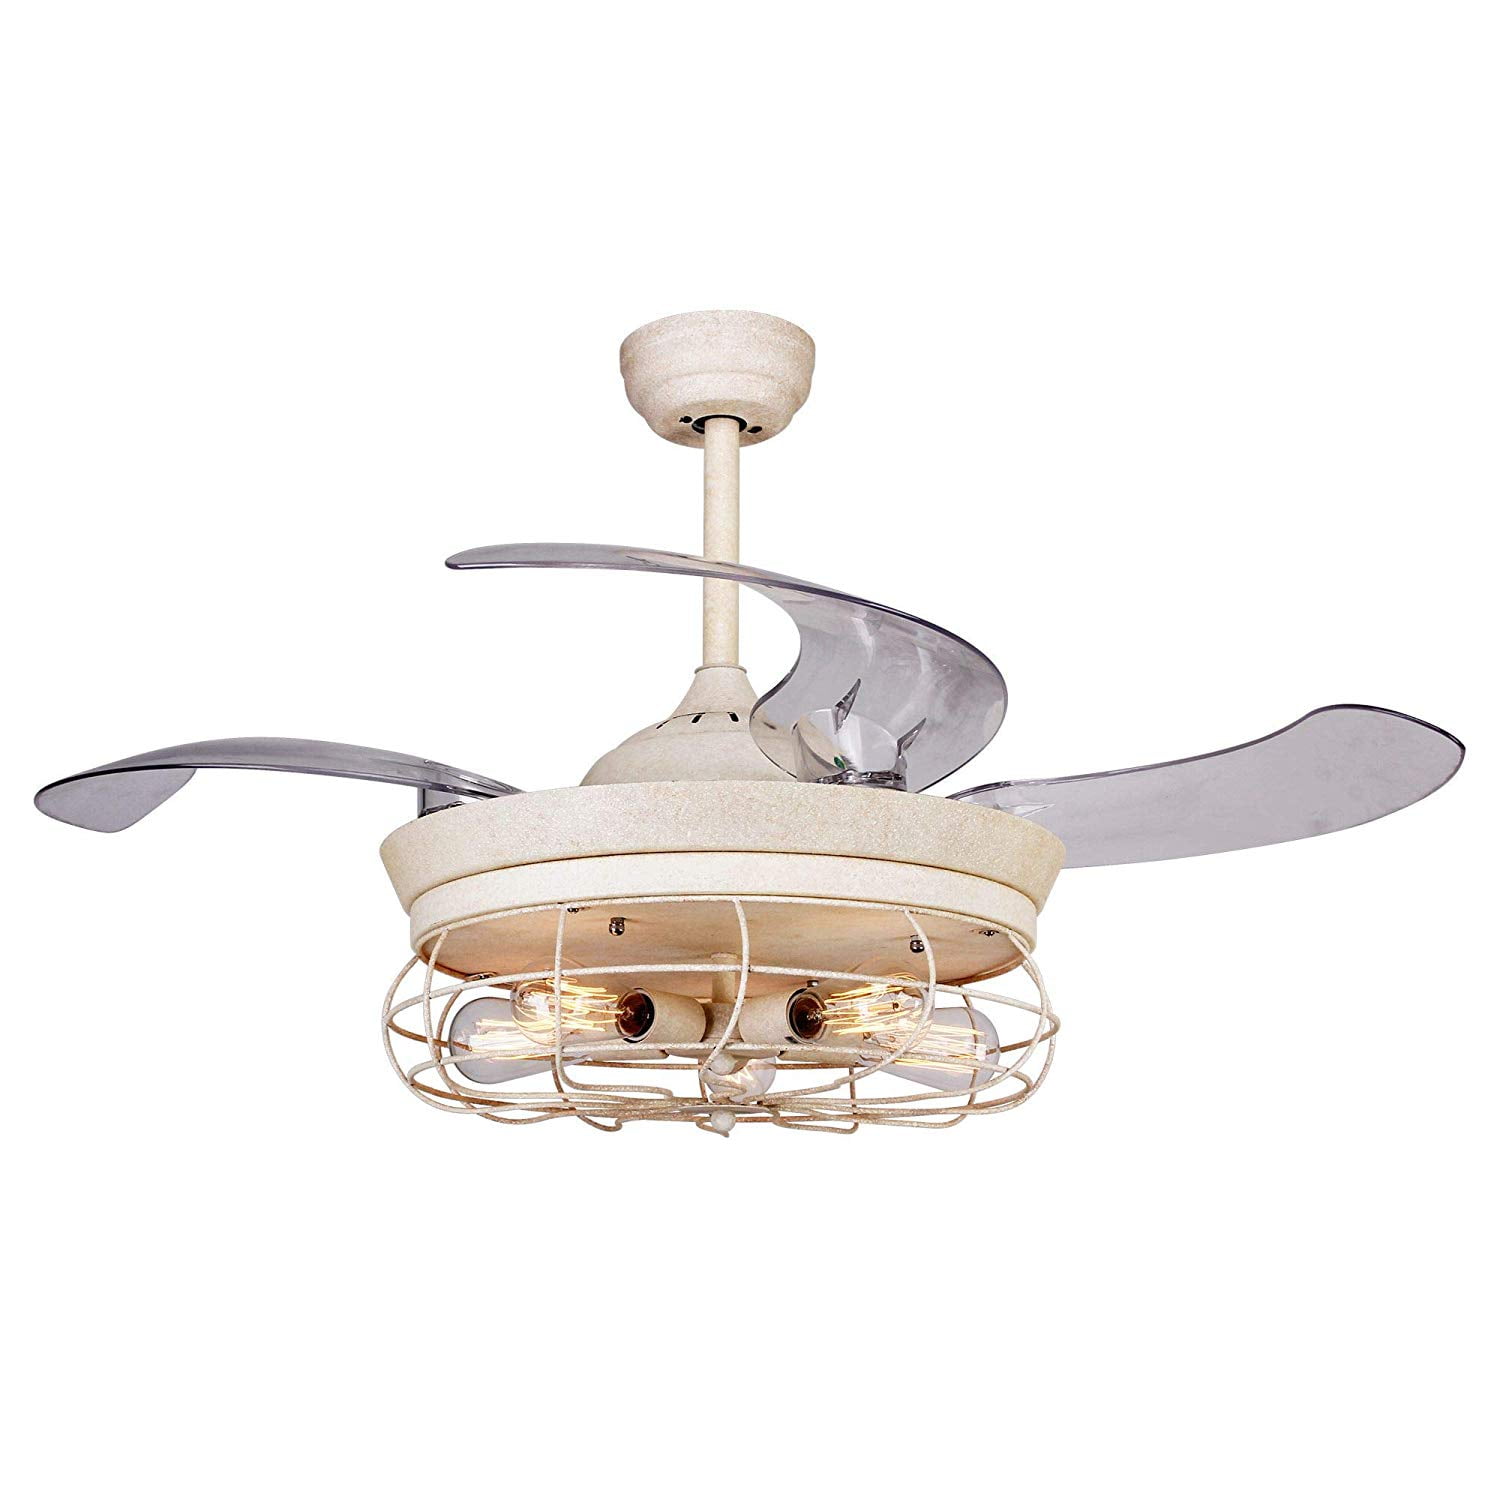 Featured image of post Edison Bulb Ceiling Fan : Tags edison bulb ceiling base.